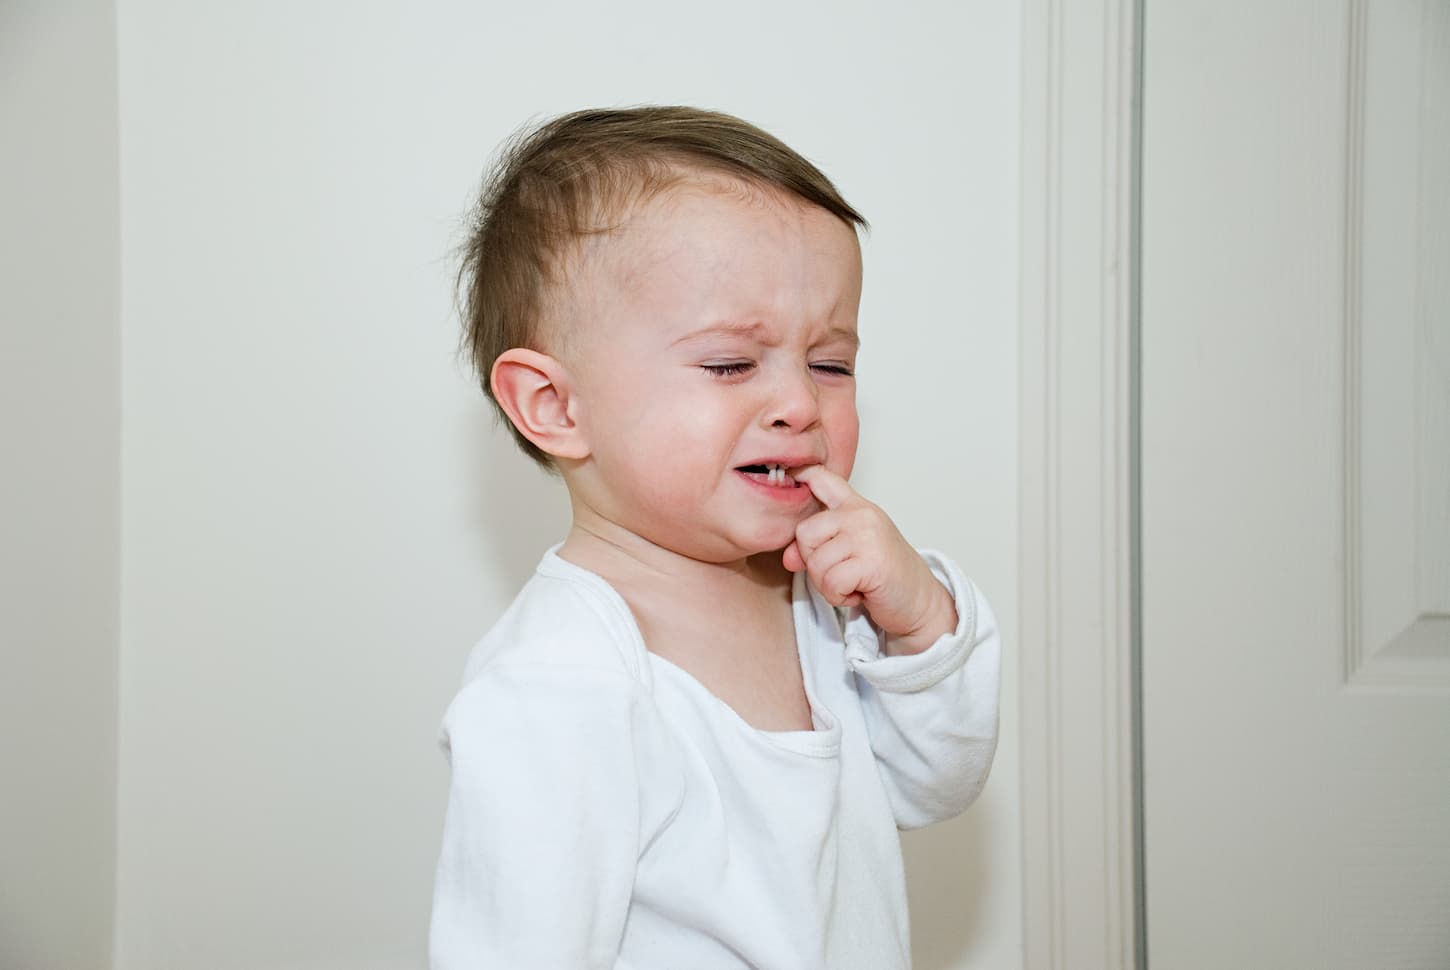 An image of a baby boy teething and looking uncomfortable.